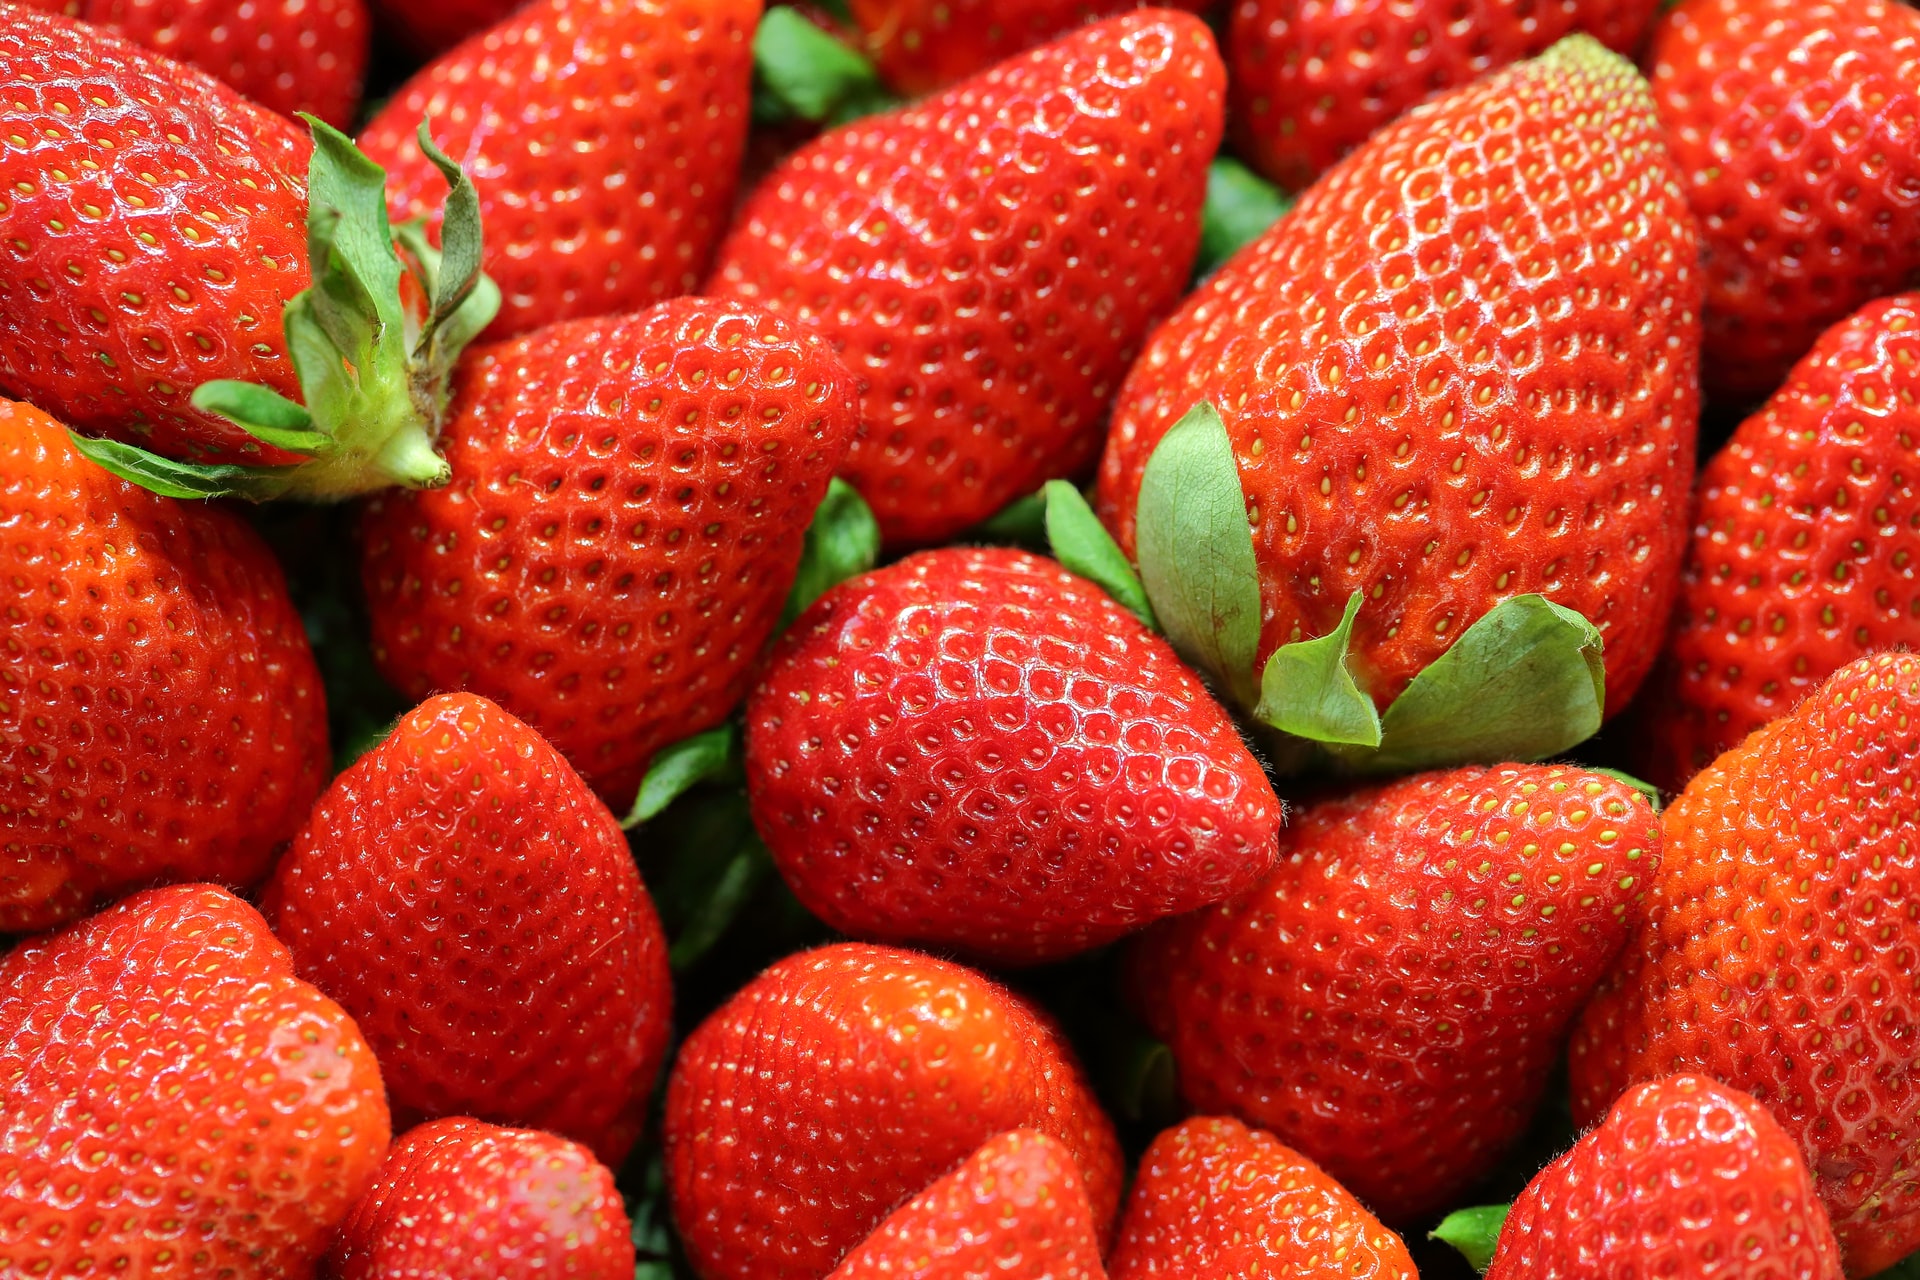 Mexican strawberry exports